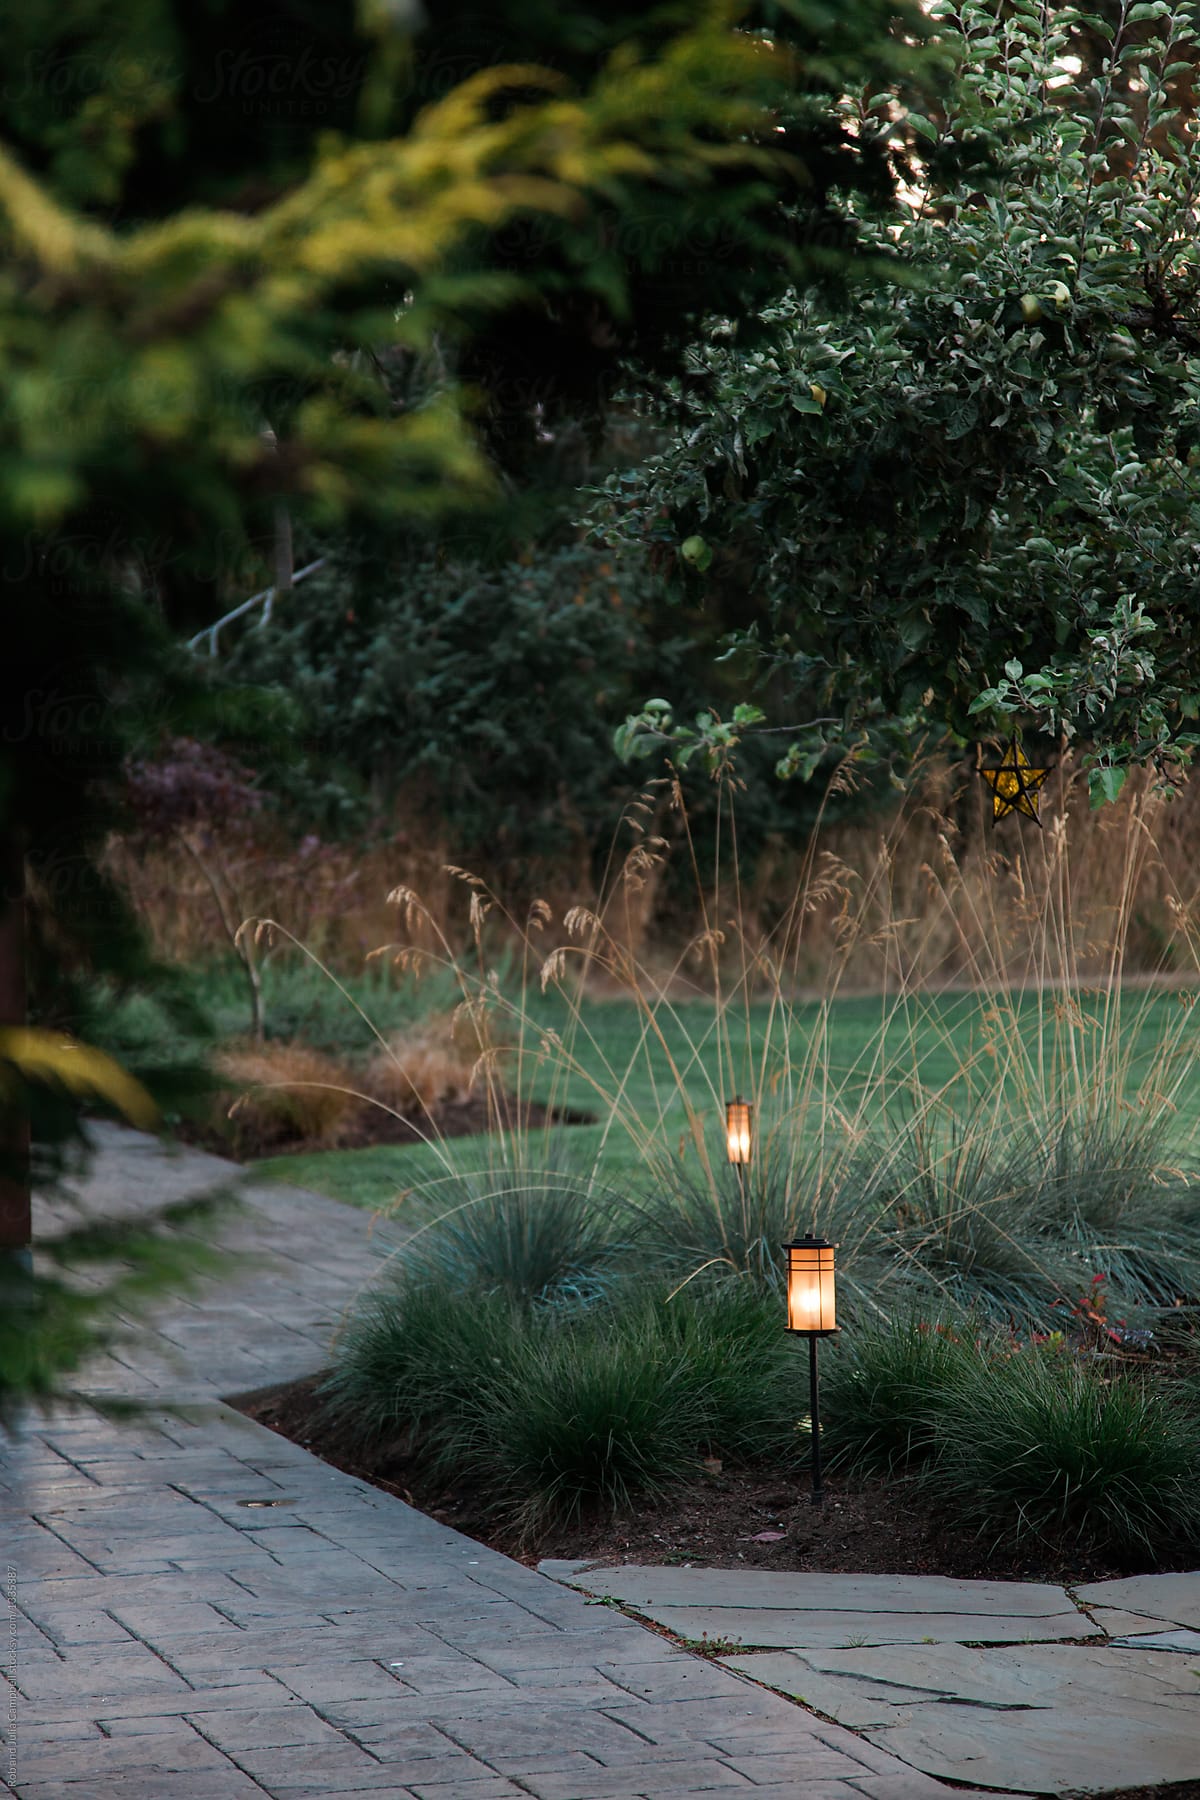 Detail of landscaping project featuring lanterns or lights